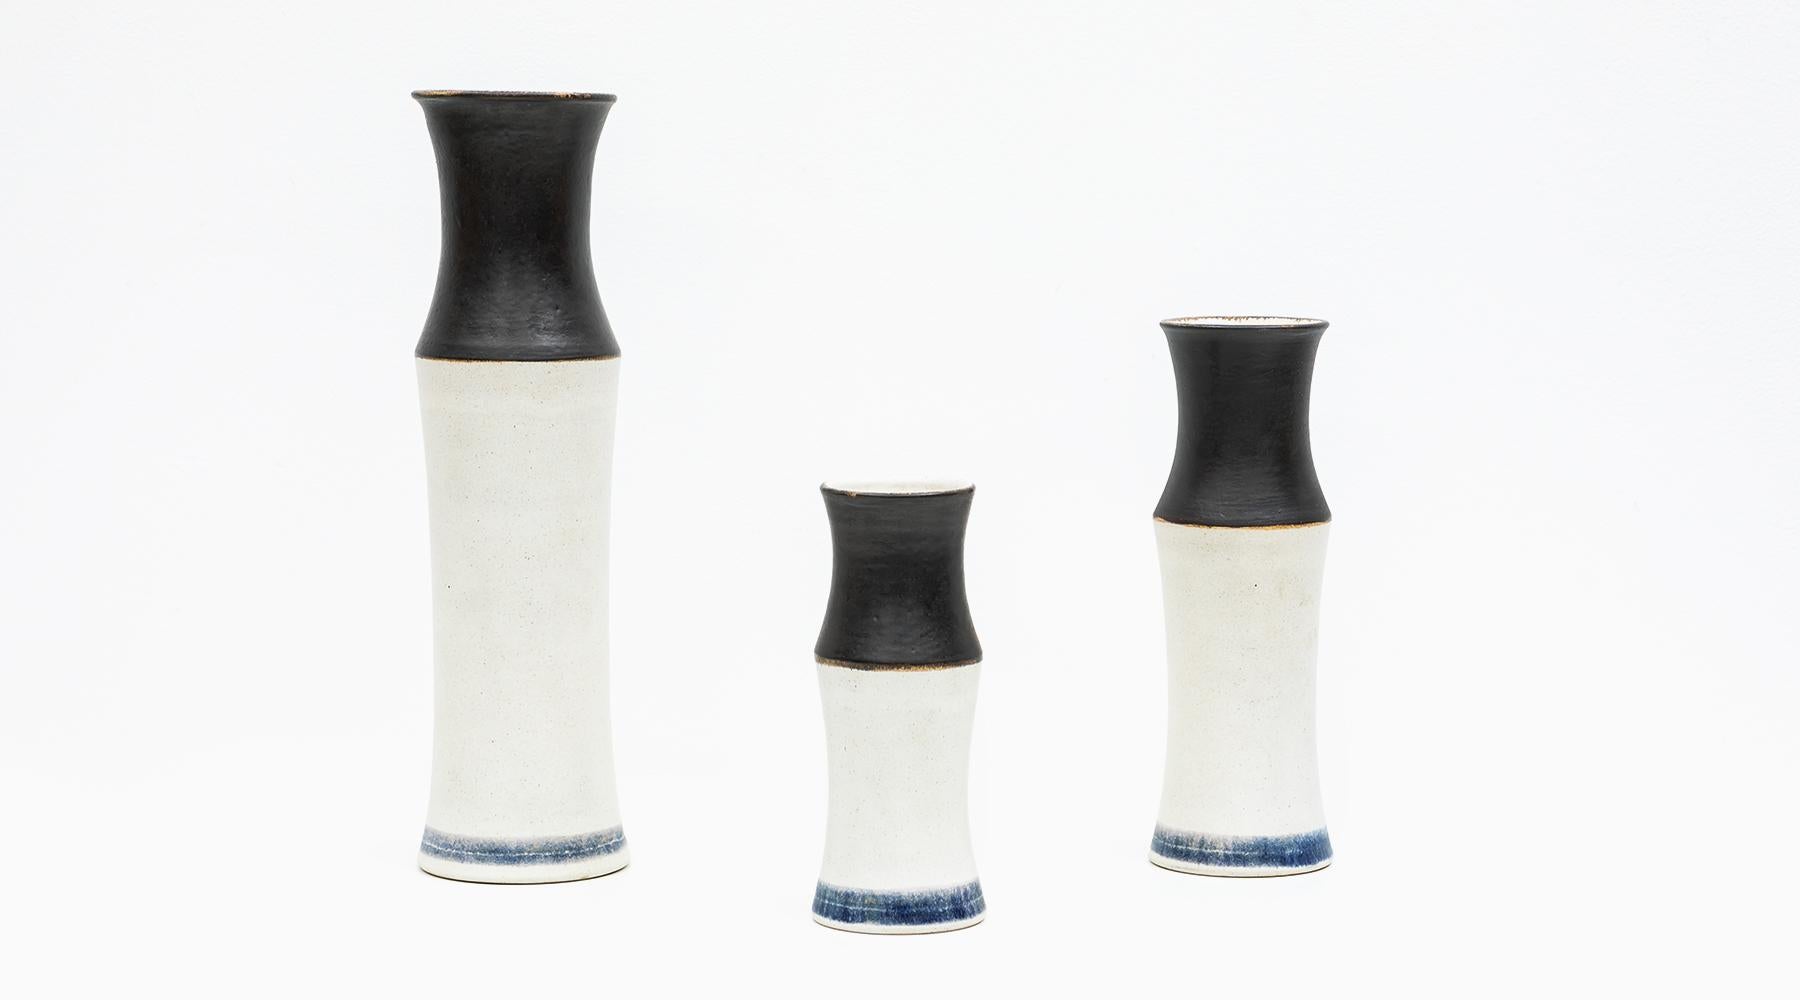 Ceramic, bamboo bottles, set of three vases, Bruno Gambone, Italy, 1980s.

Three charming vases that vary in height and width as a set. The lower part is in a light beige in contrast to the upper part in black. The special, cheeky detail is the